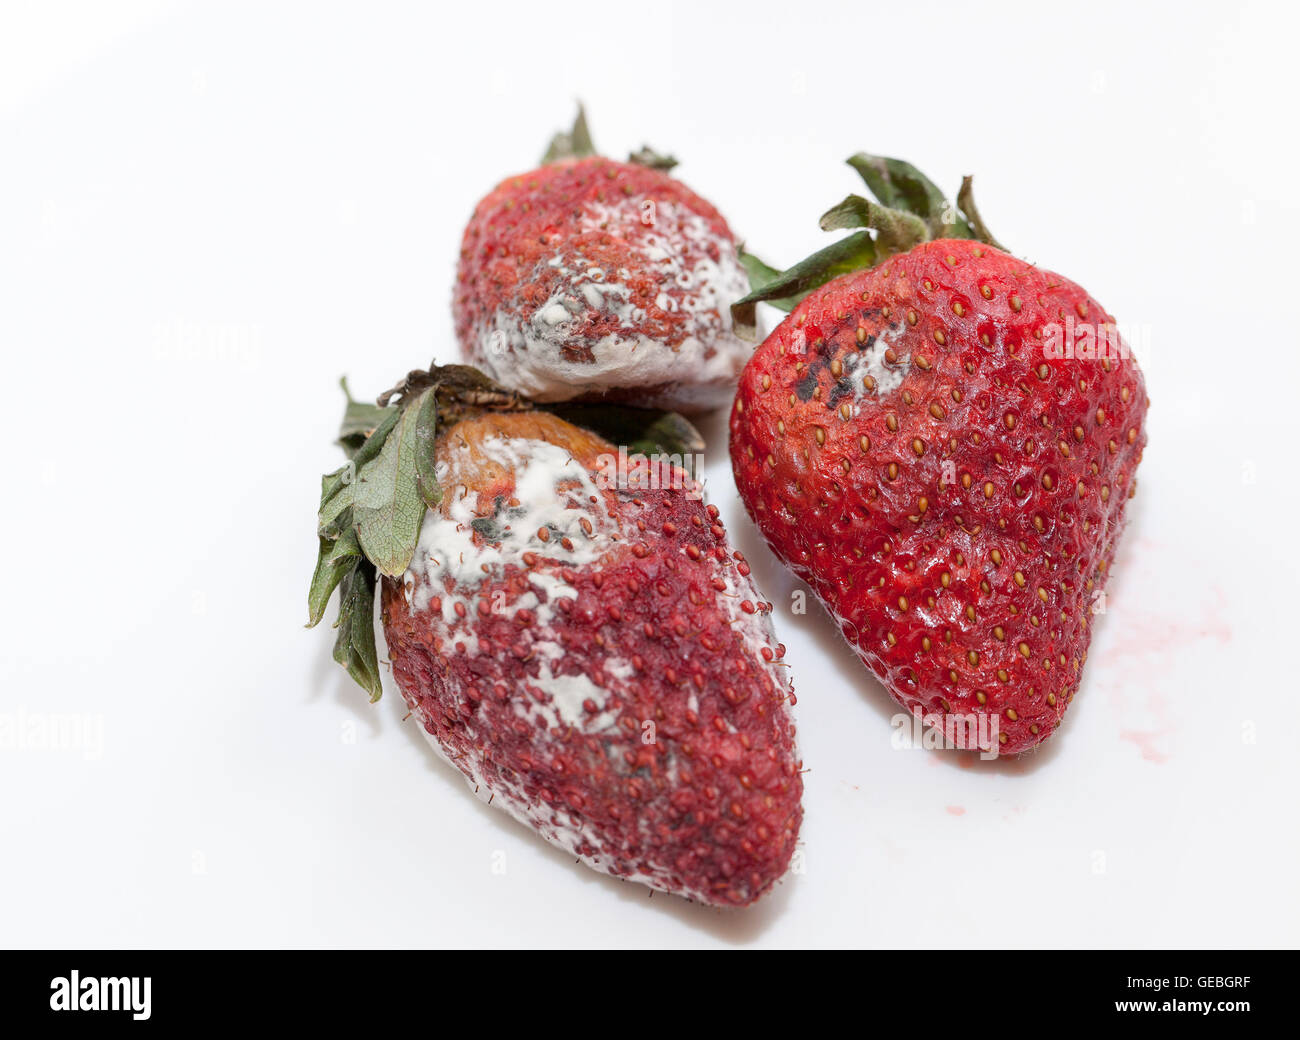 Strawberry with mold stock photo. Image of snack, mildew - 223374096